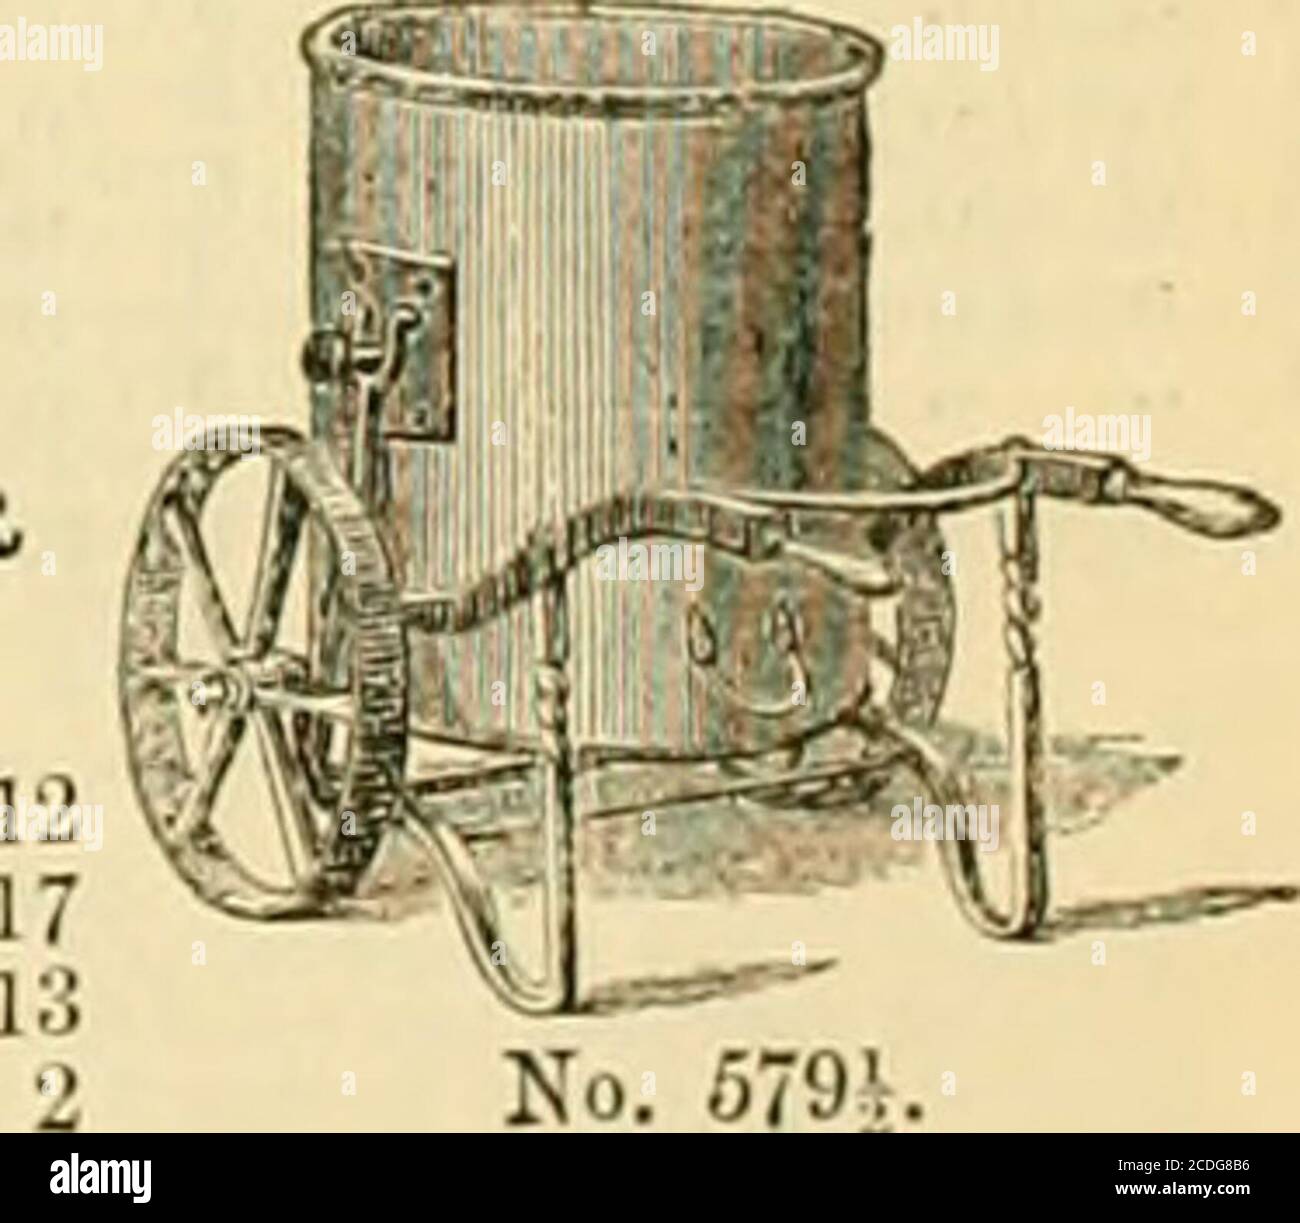 . The Gardeners' chronicle and agricultural gazette . No. 570 . SWING WATER BARROW. 50 Gals. .. £. 3 17. ROYAL AGRICULTURAL SHOW, held atBURY ST. EDMUNDS, 1867. —A SILVERMEDAL was Awarded to JOHN WARNERAND SONS CHAIN PUMP. This Pump, fromthe entire absence of Valves, is especially adaptedfor the use of Builders, Contractors, and Fiirmers. WIND ENGINES, ADAPTED rOB PUMPING, CHAFF-CUTTING, GRINDING, &c. , . ,, ,„„ l»ffl JOHN WARNER ..« SONS beg to inform the Trade and the PubUc generally that they have purcWt^^^^^^^^^ ENGINES tnanufacturcd by the lato They have also to state that a Patent has b Stock Photo